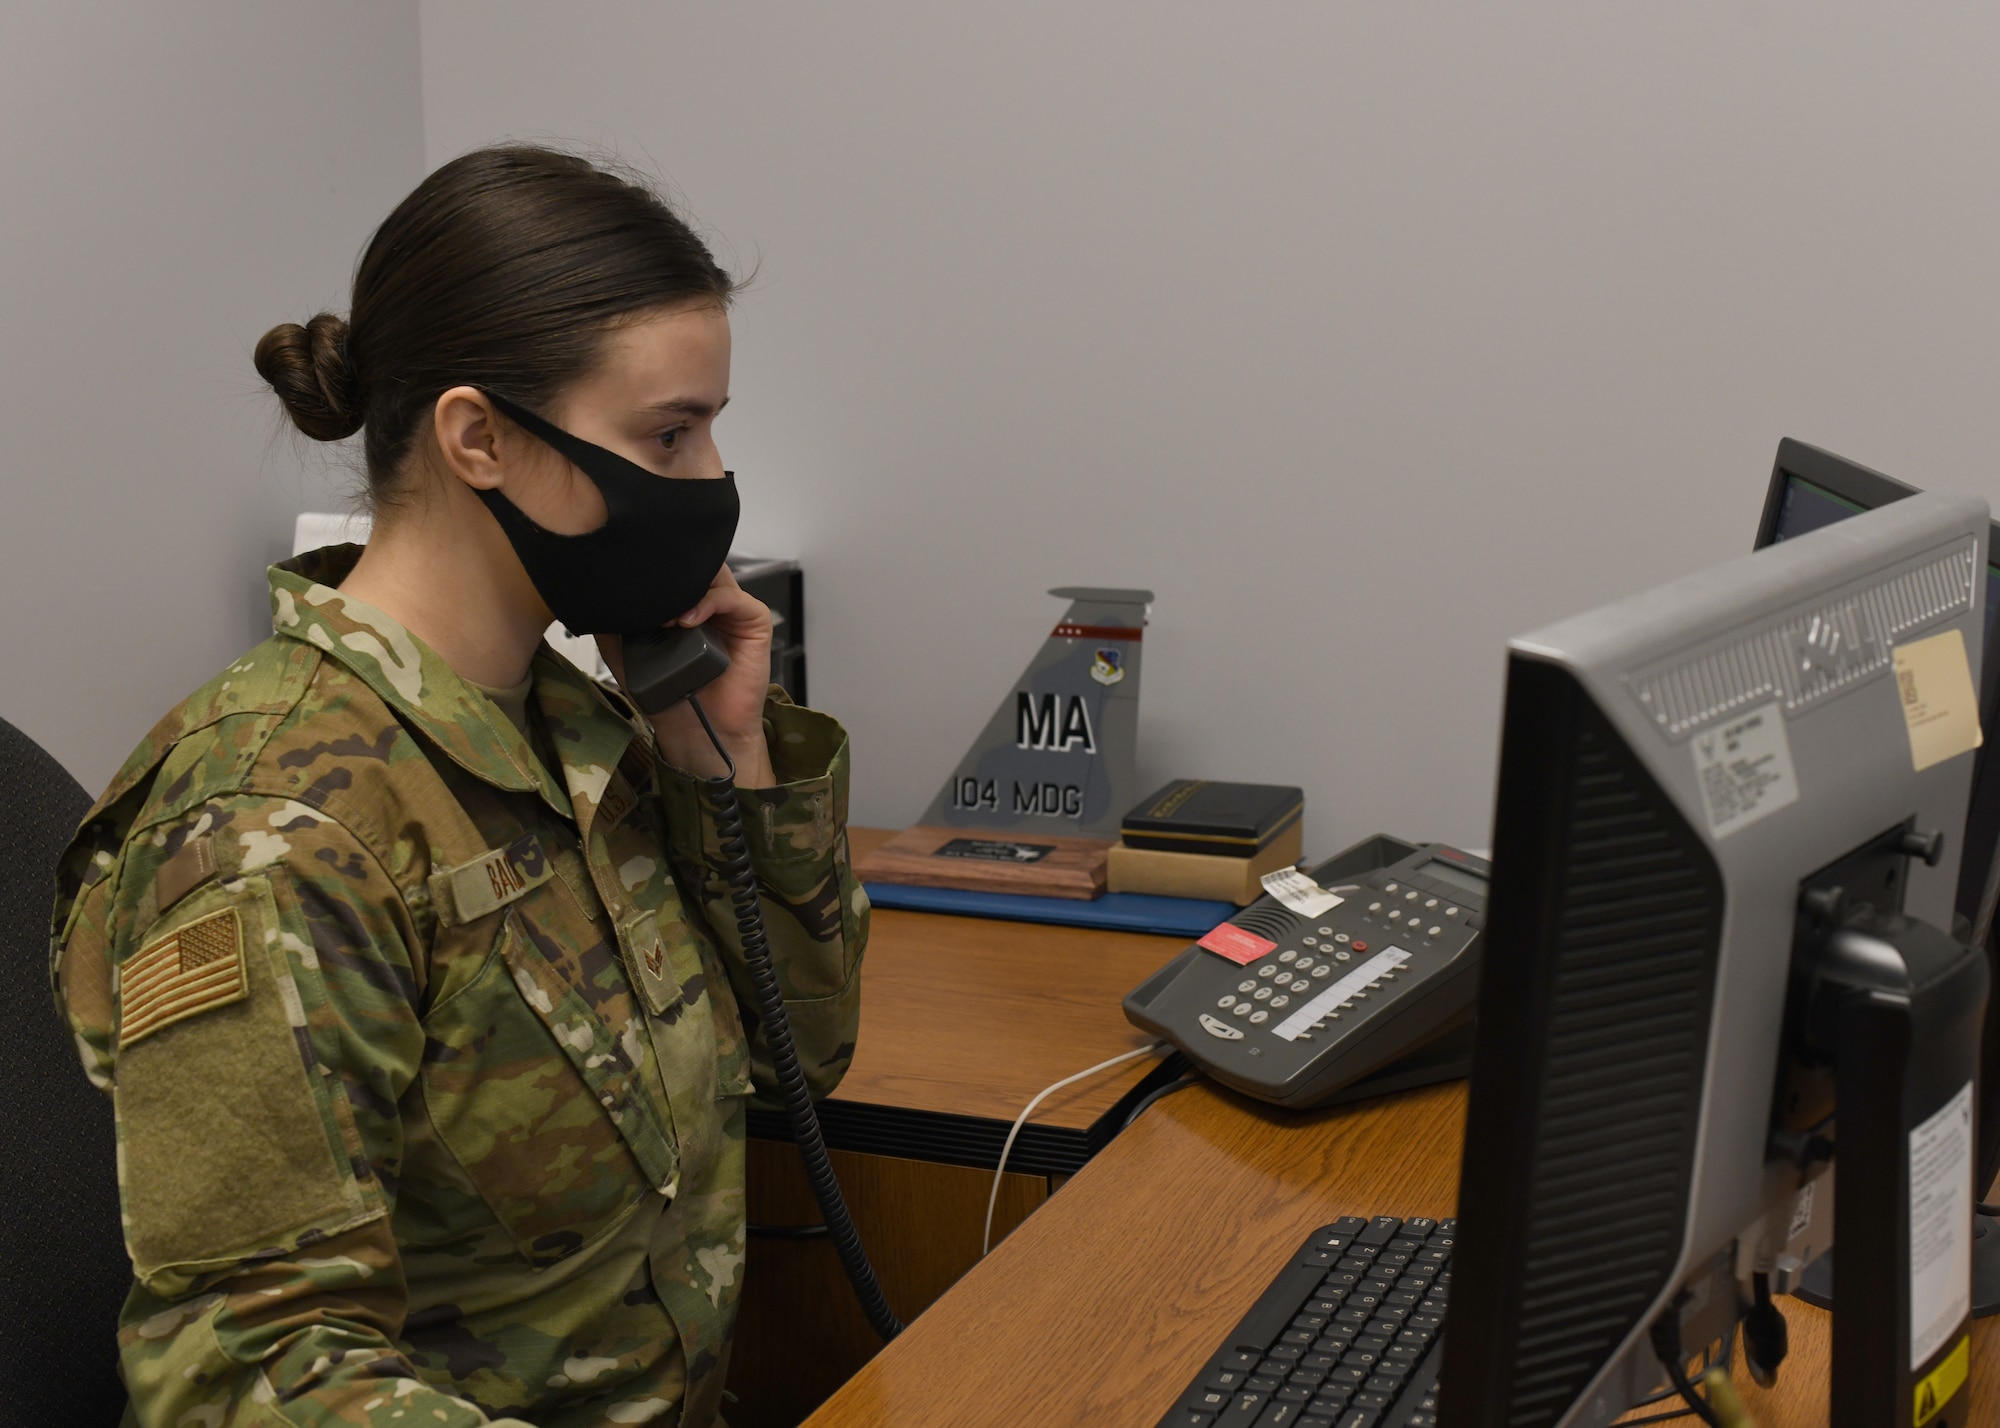 Senior Airman Weronika Baczek, public health technician, 104th Medical Group, answers calls pertaining to possible contact with COVID-19, in her office at Barnes Air National Guard Base, Massachusetts, Feb. 17, 2021. Contact tracing is critical for safeguarding 104th Fighter Wing mission readiness and the health of our Barnestormers and surrounding communities from COVID-19. (U.S. Air National Guard courtesy photo)